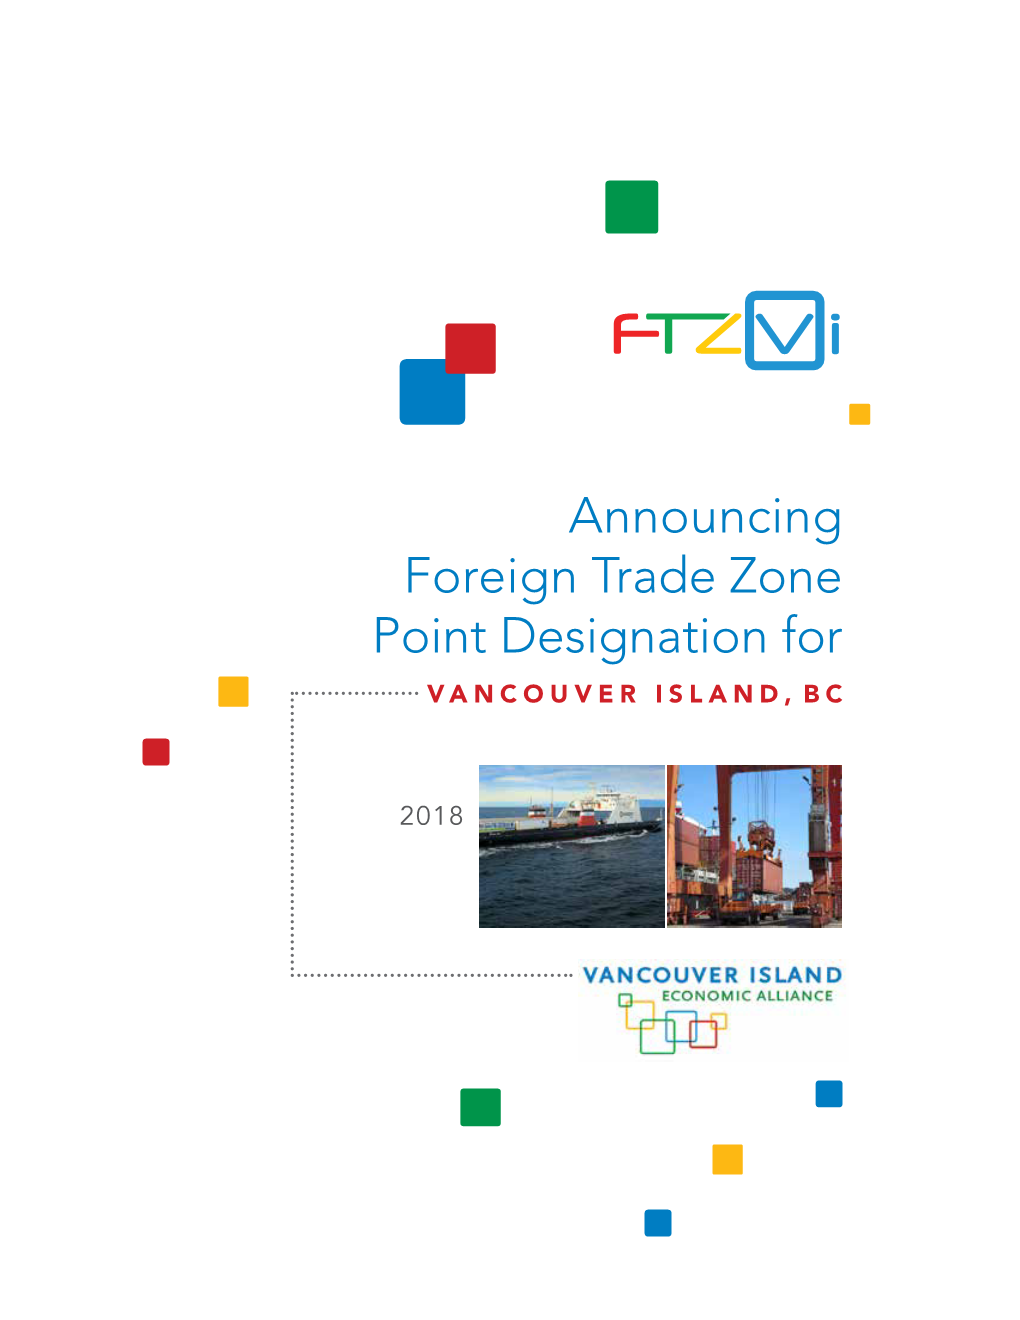 Announcing Foreign Trade Zone Point Designation for VANCOUVER ISLAND, BC